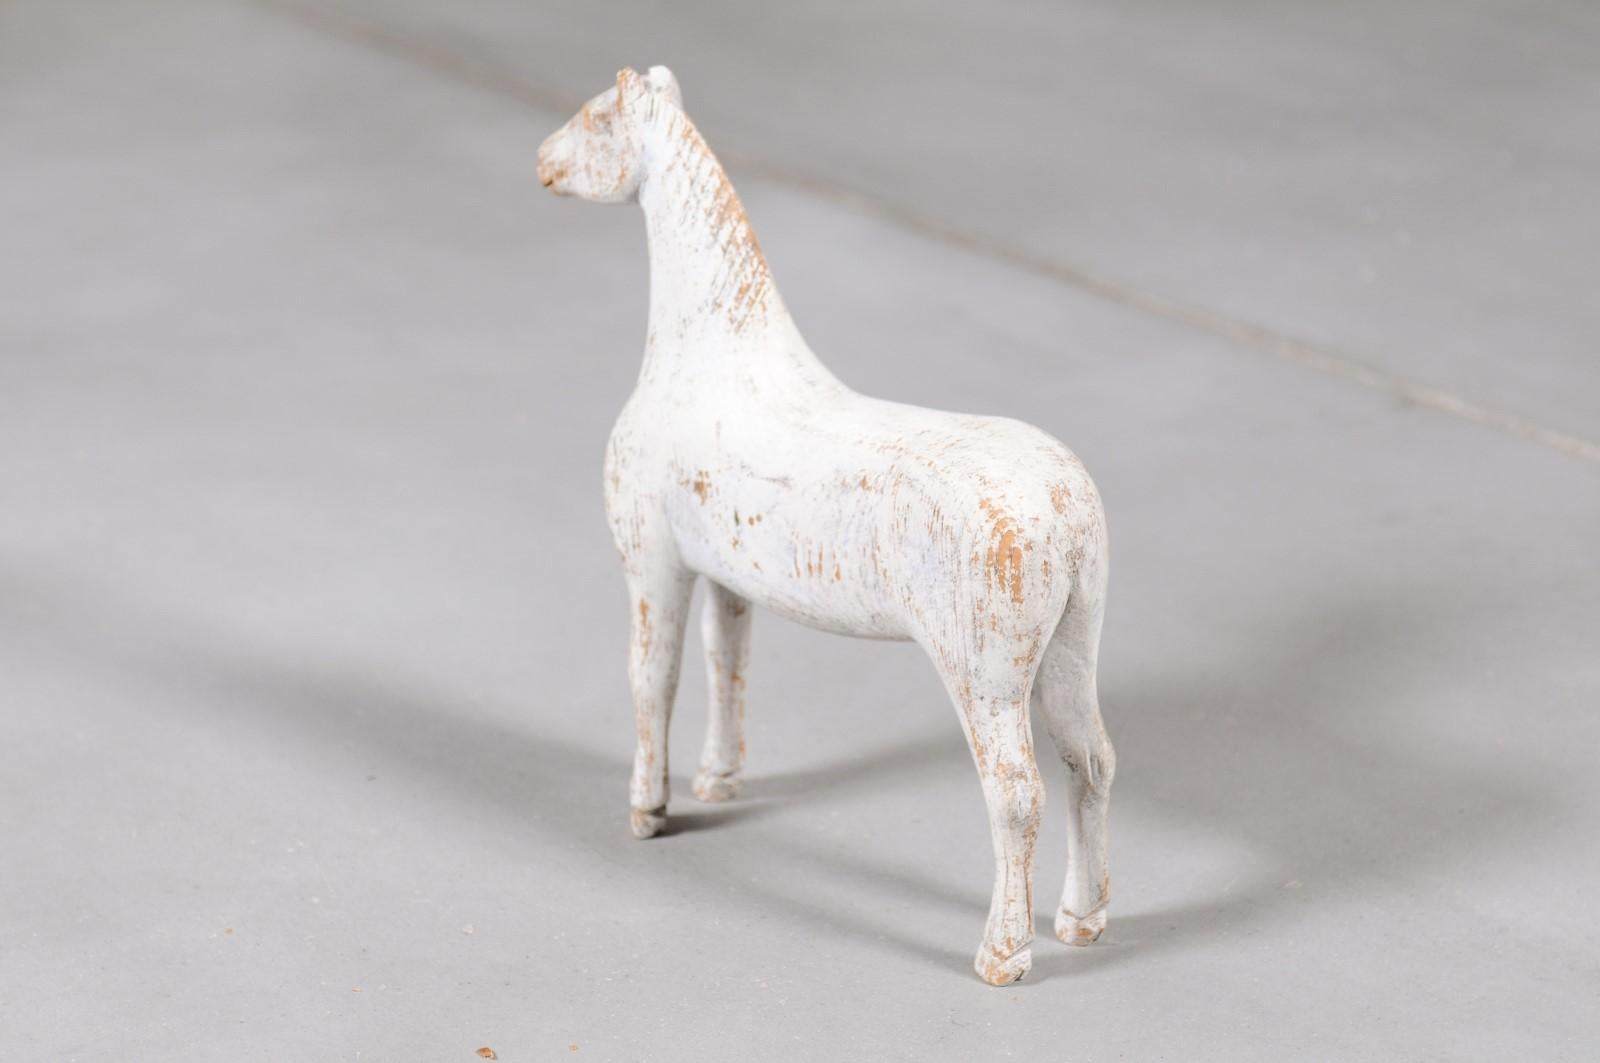 Swedish 1900s Painted Miniature Wooden Horse Sculpture with Distressed Patina 3